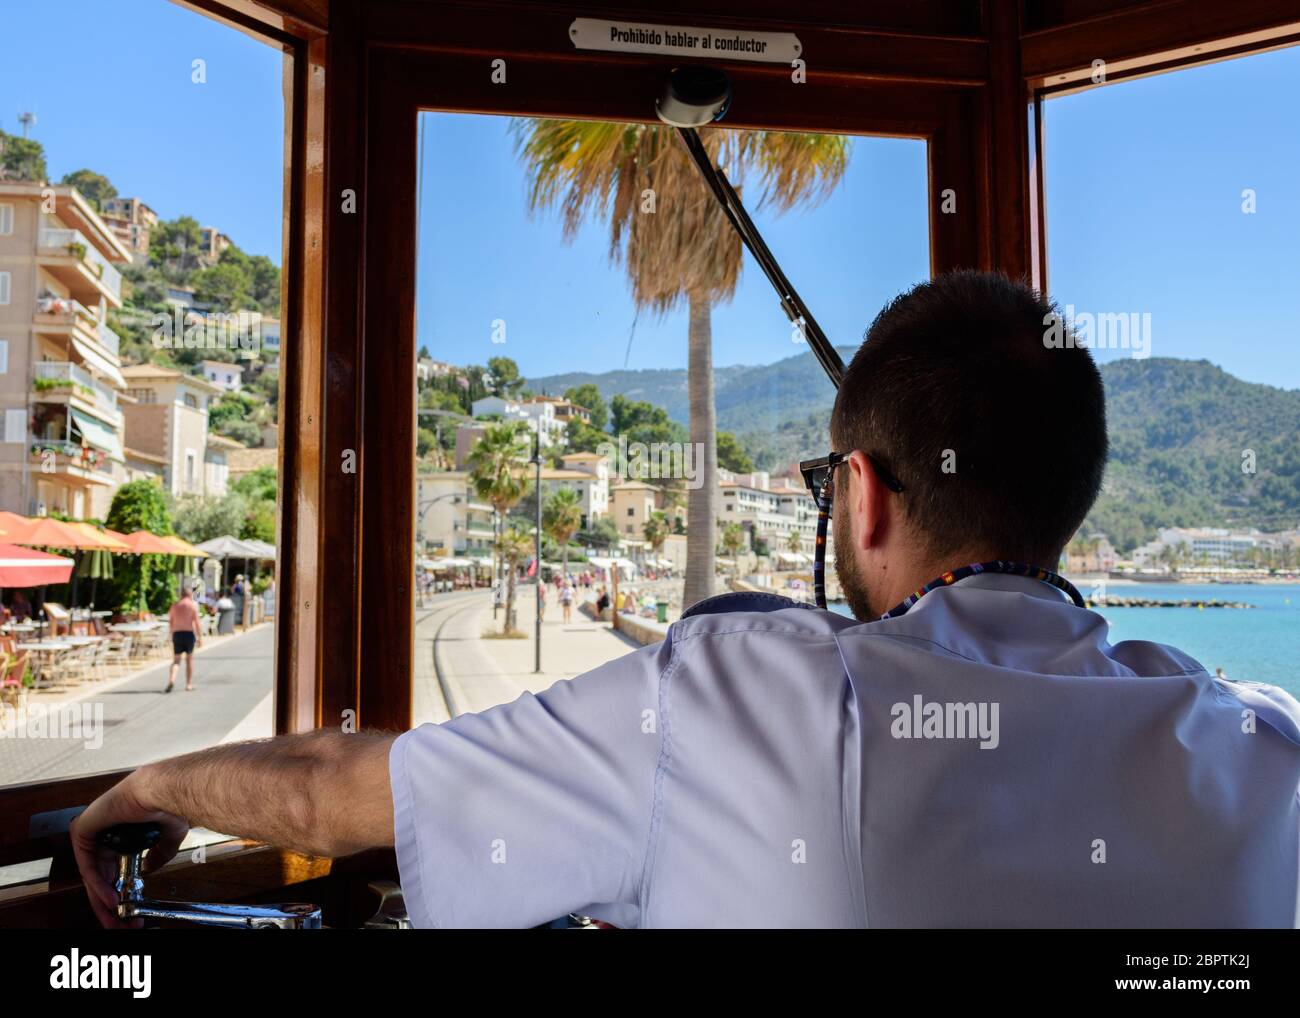 Majorca, Spain June 18th 2019 - The view from the driver's seat on the antique tram in Port de Soller, a popular tourist destination on the coast Stock Photo